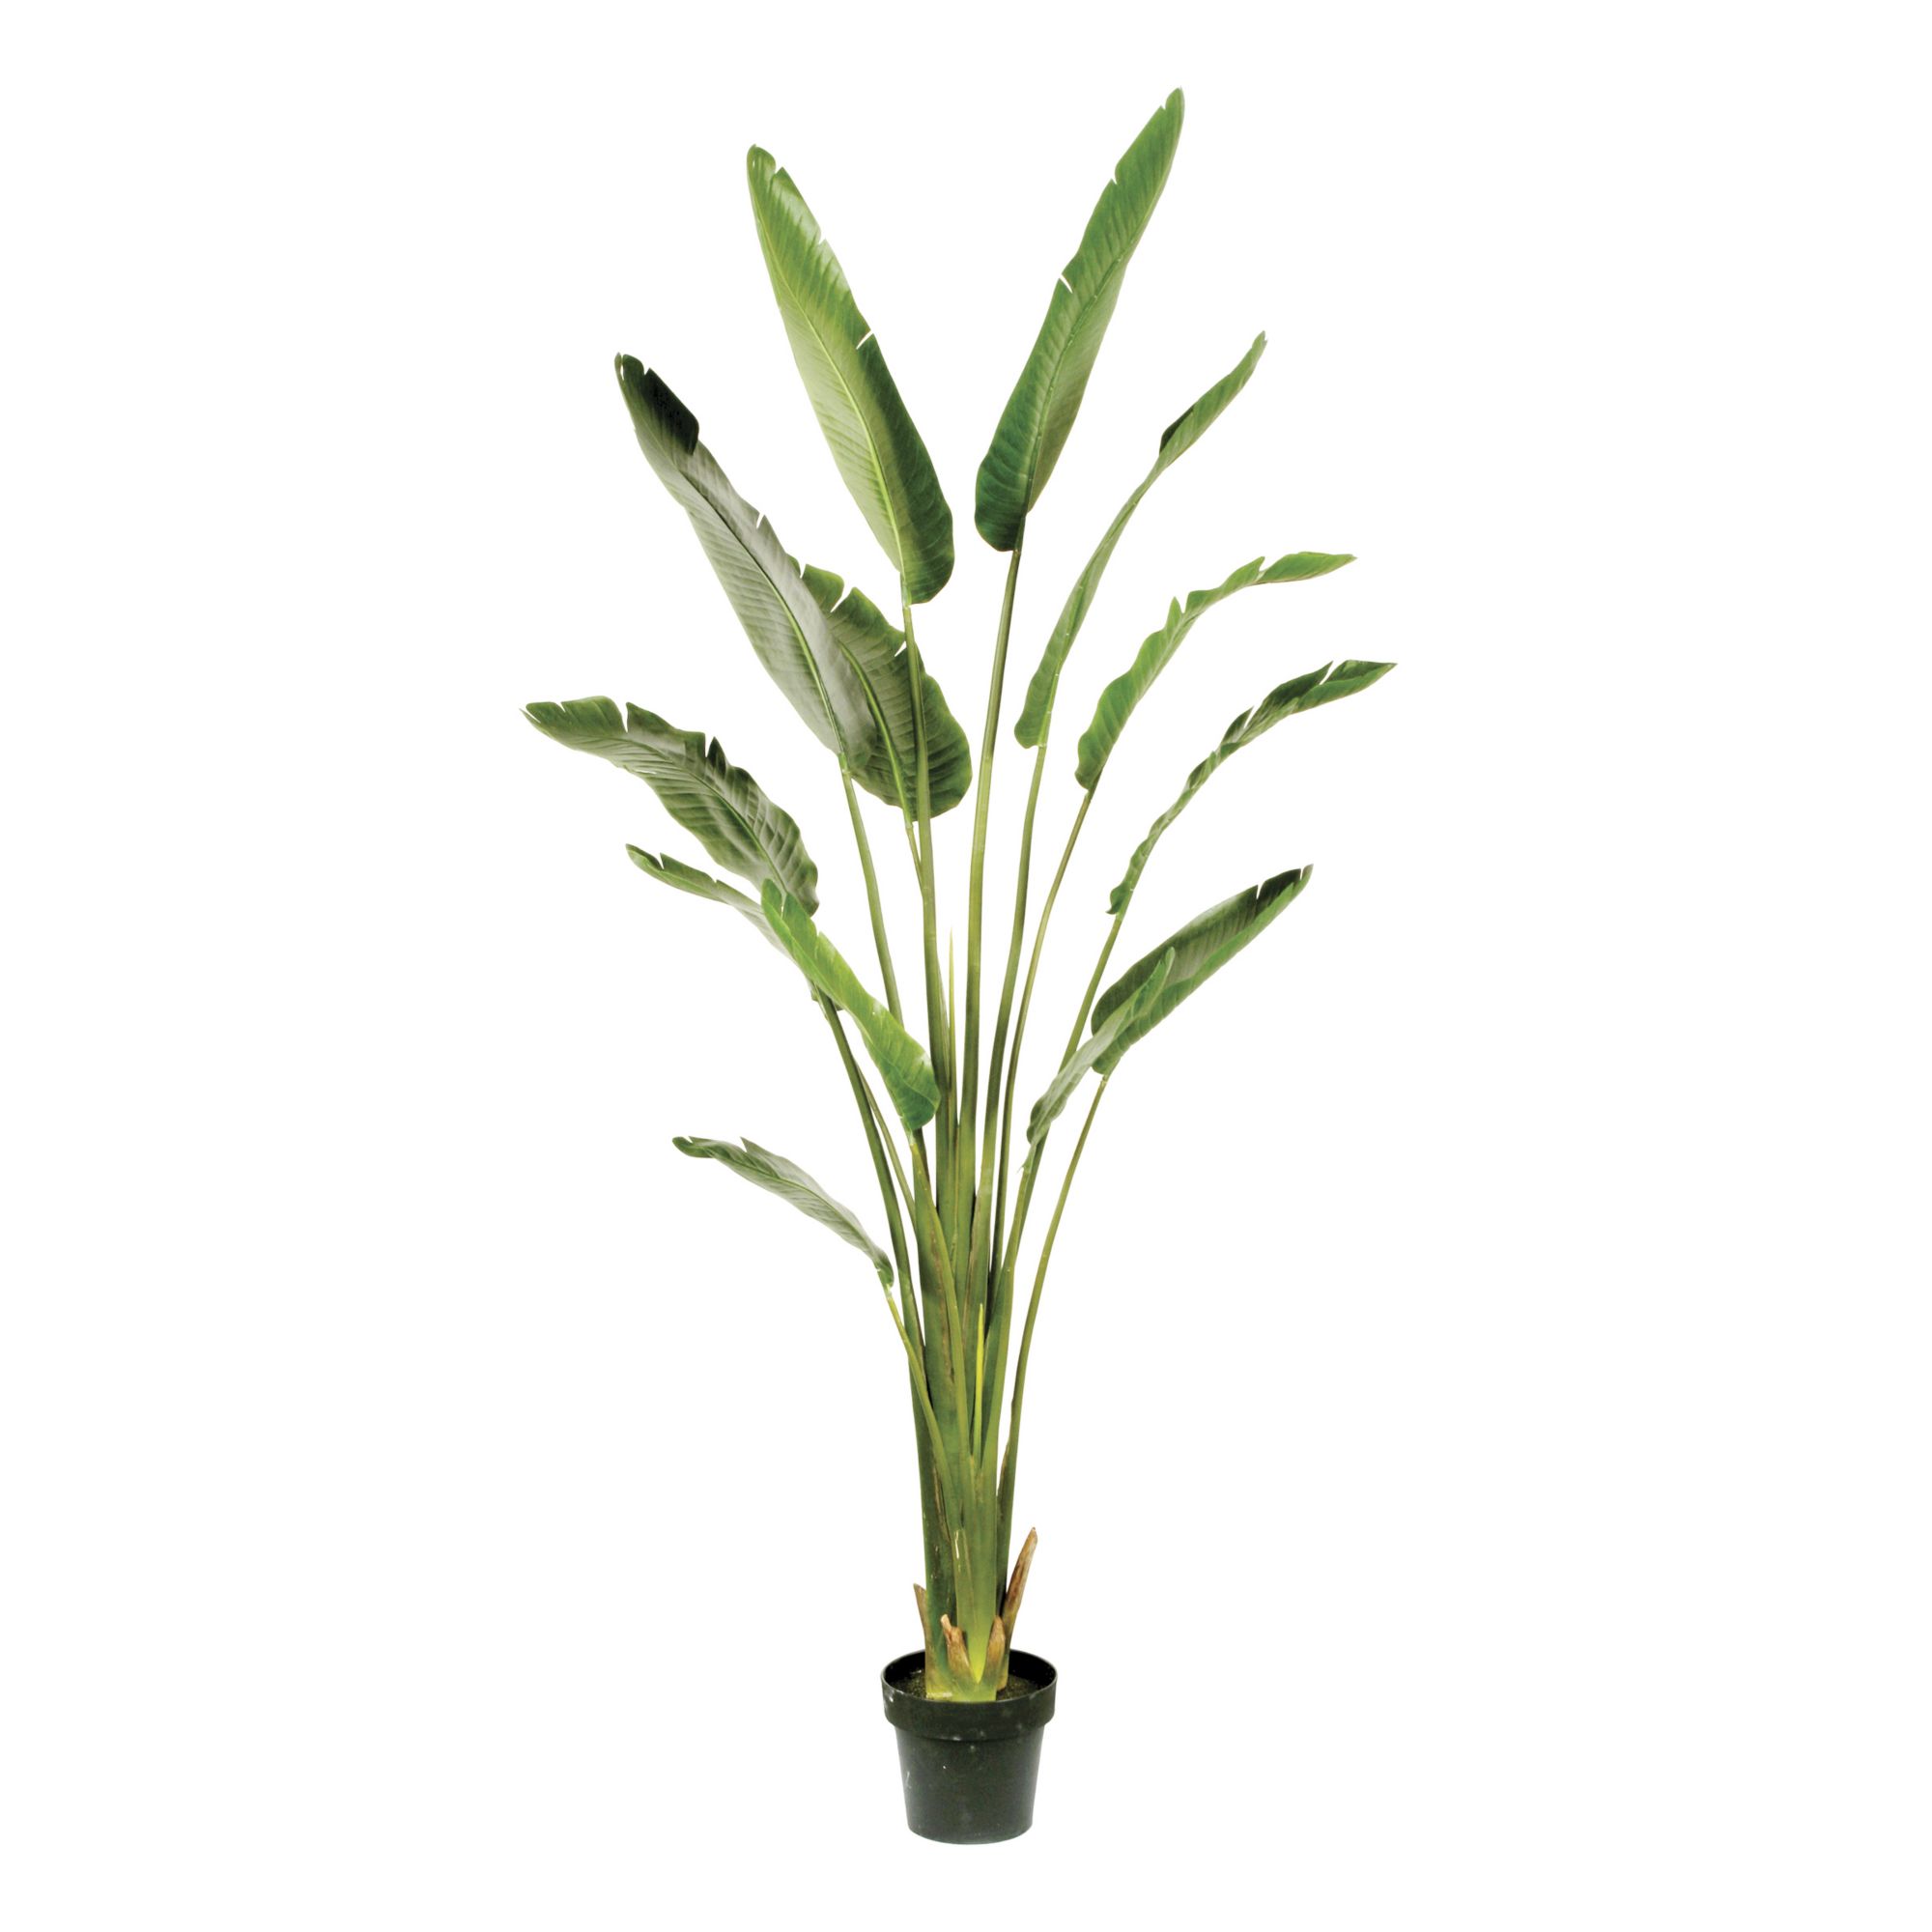 Winward 6' Potted Travelers Palm Decorative Artificial Plant